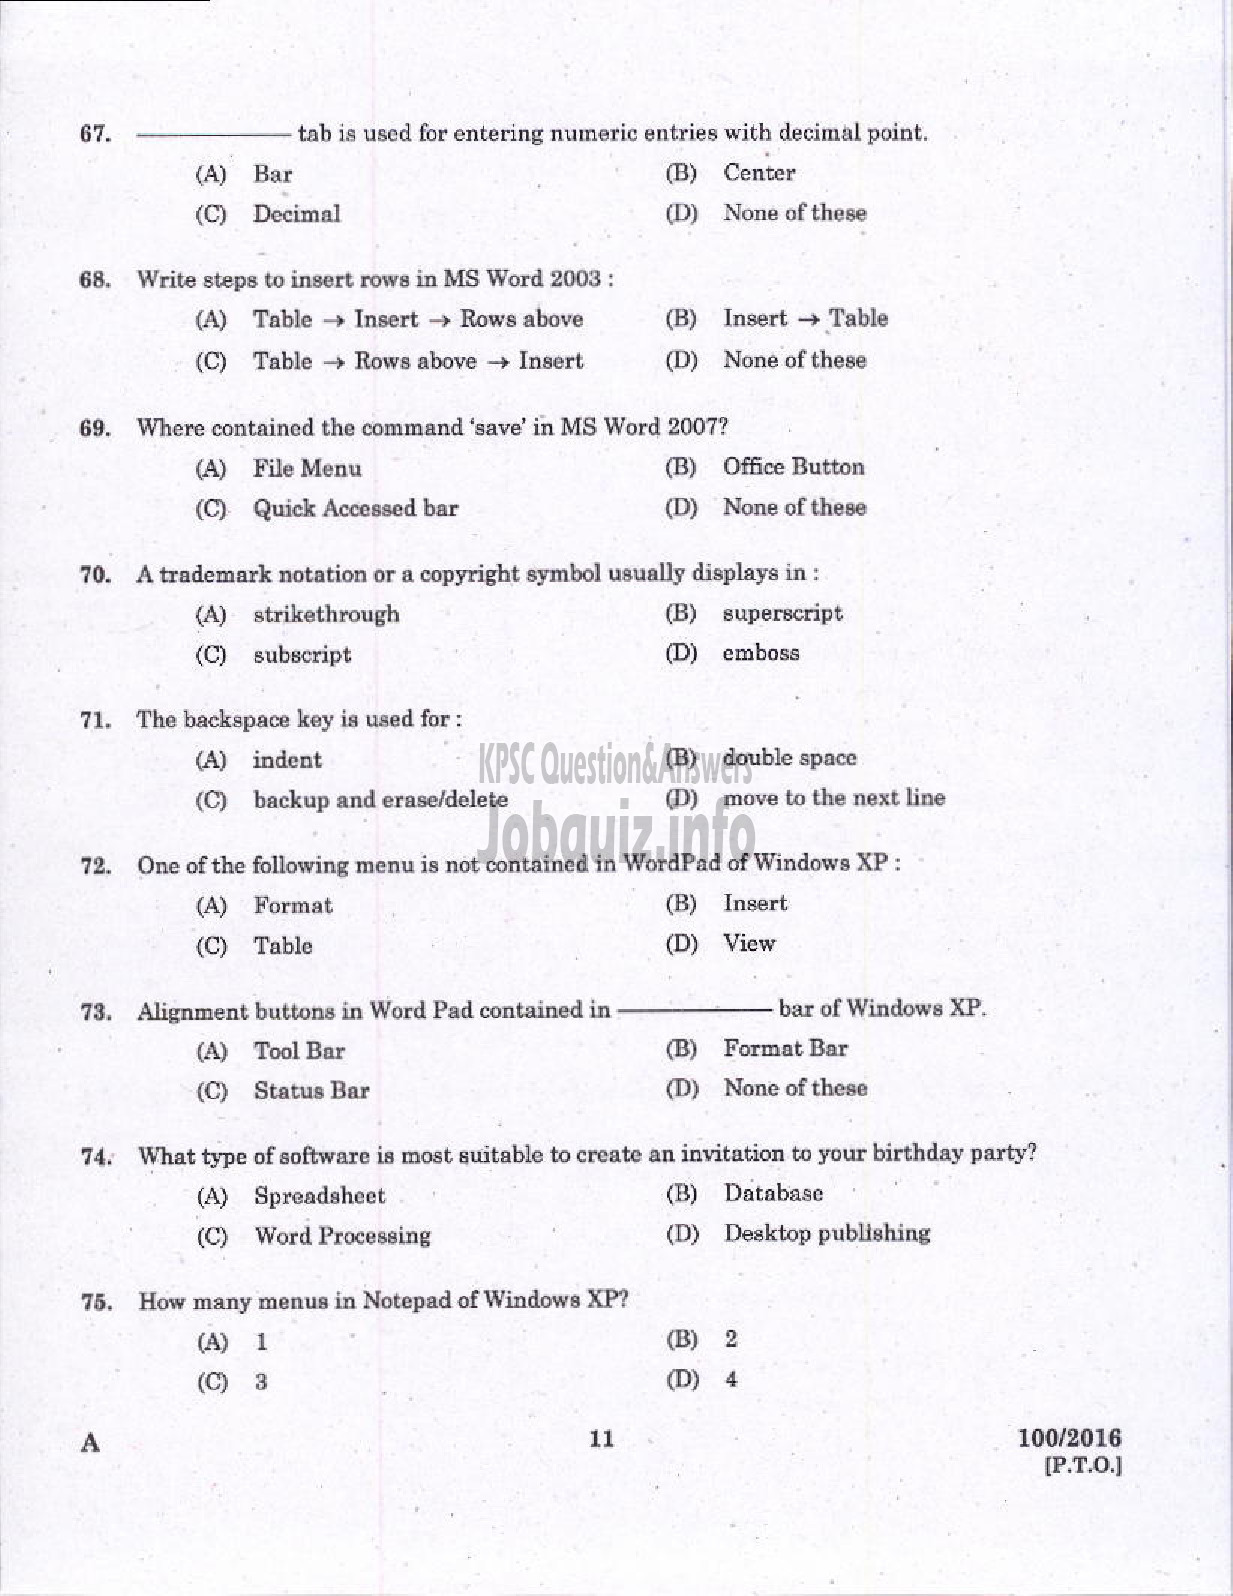 Kerala PSC Question Paper - DATA ENTRY OPERATOR DCB-9